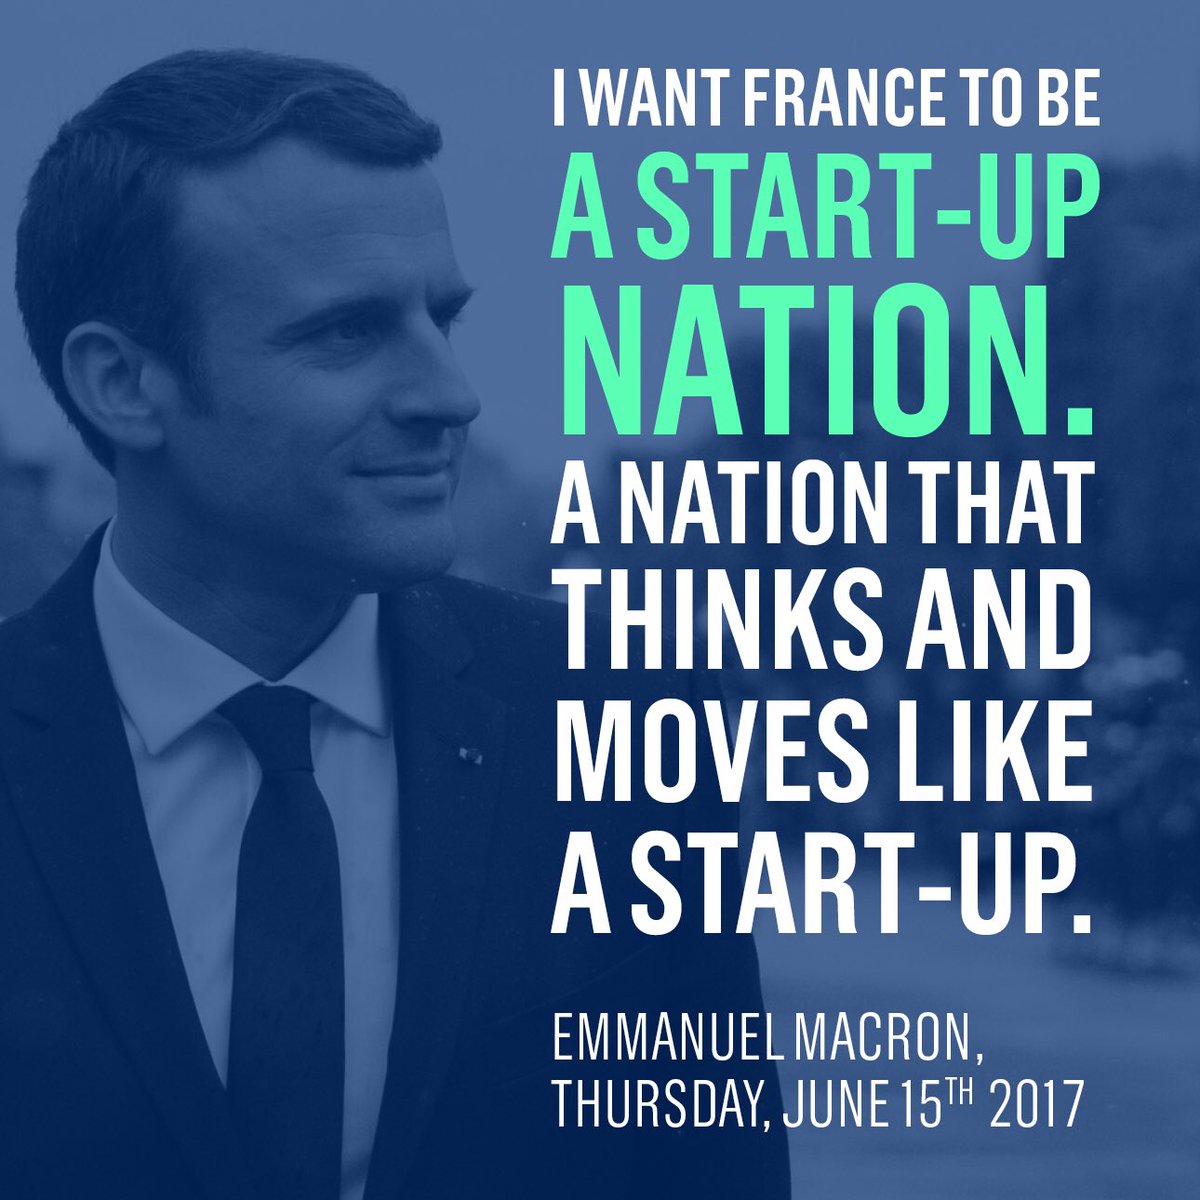 I want France to be a start-up nation. A nation that thinks and moves like a start-up. #VivaTech